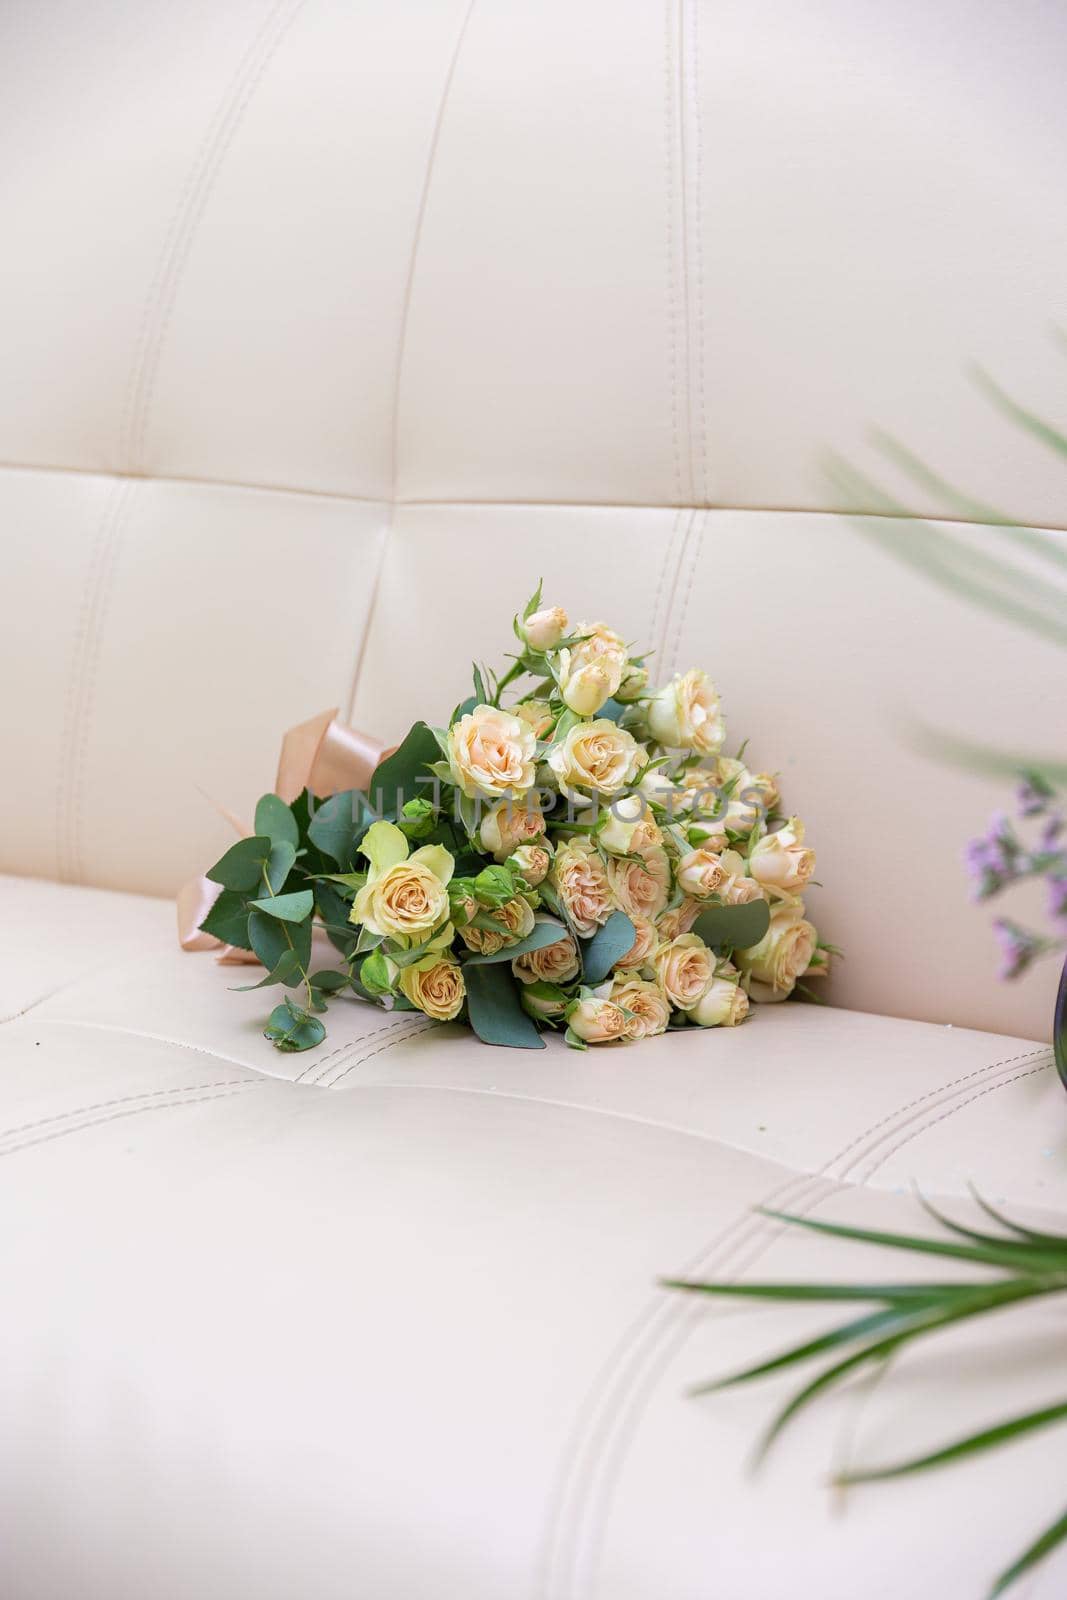 A bouquet of beautiful flowers lies on the sofa. High quality photo